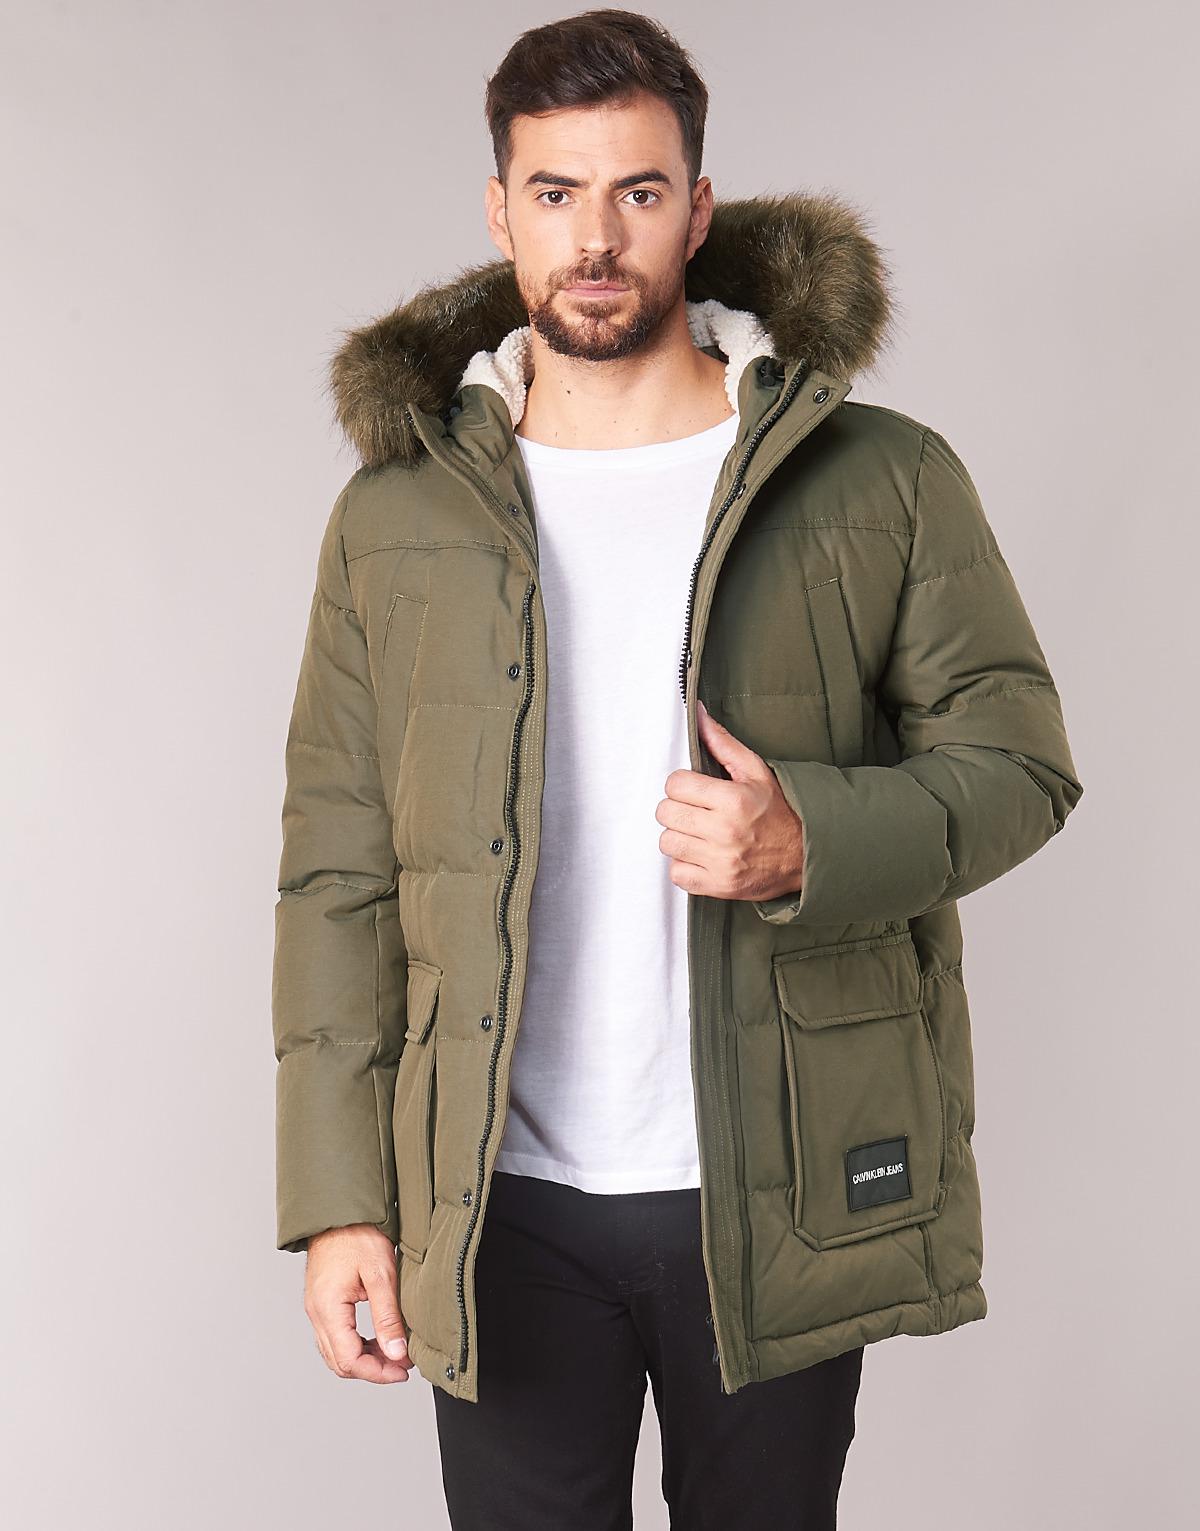 Calvin Klein Canvas Quilted Down Parka Jacket in Green for Men - Lyst